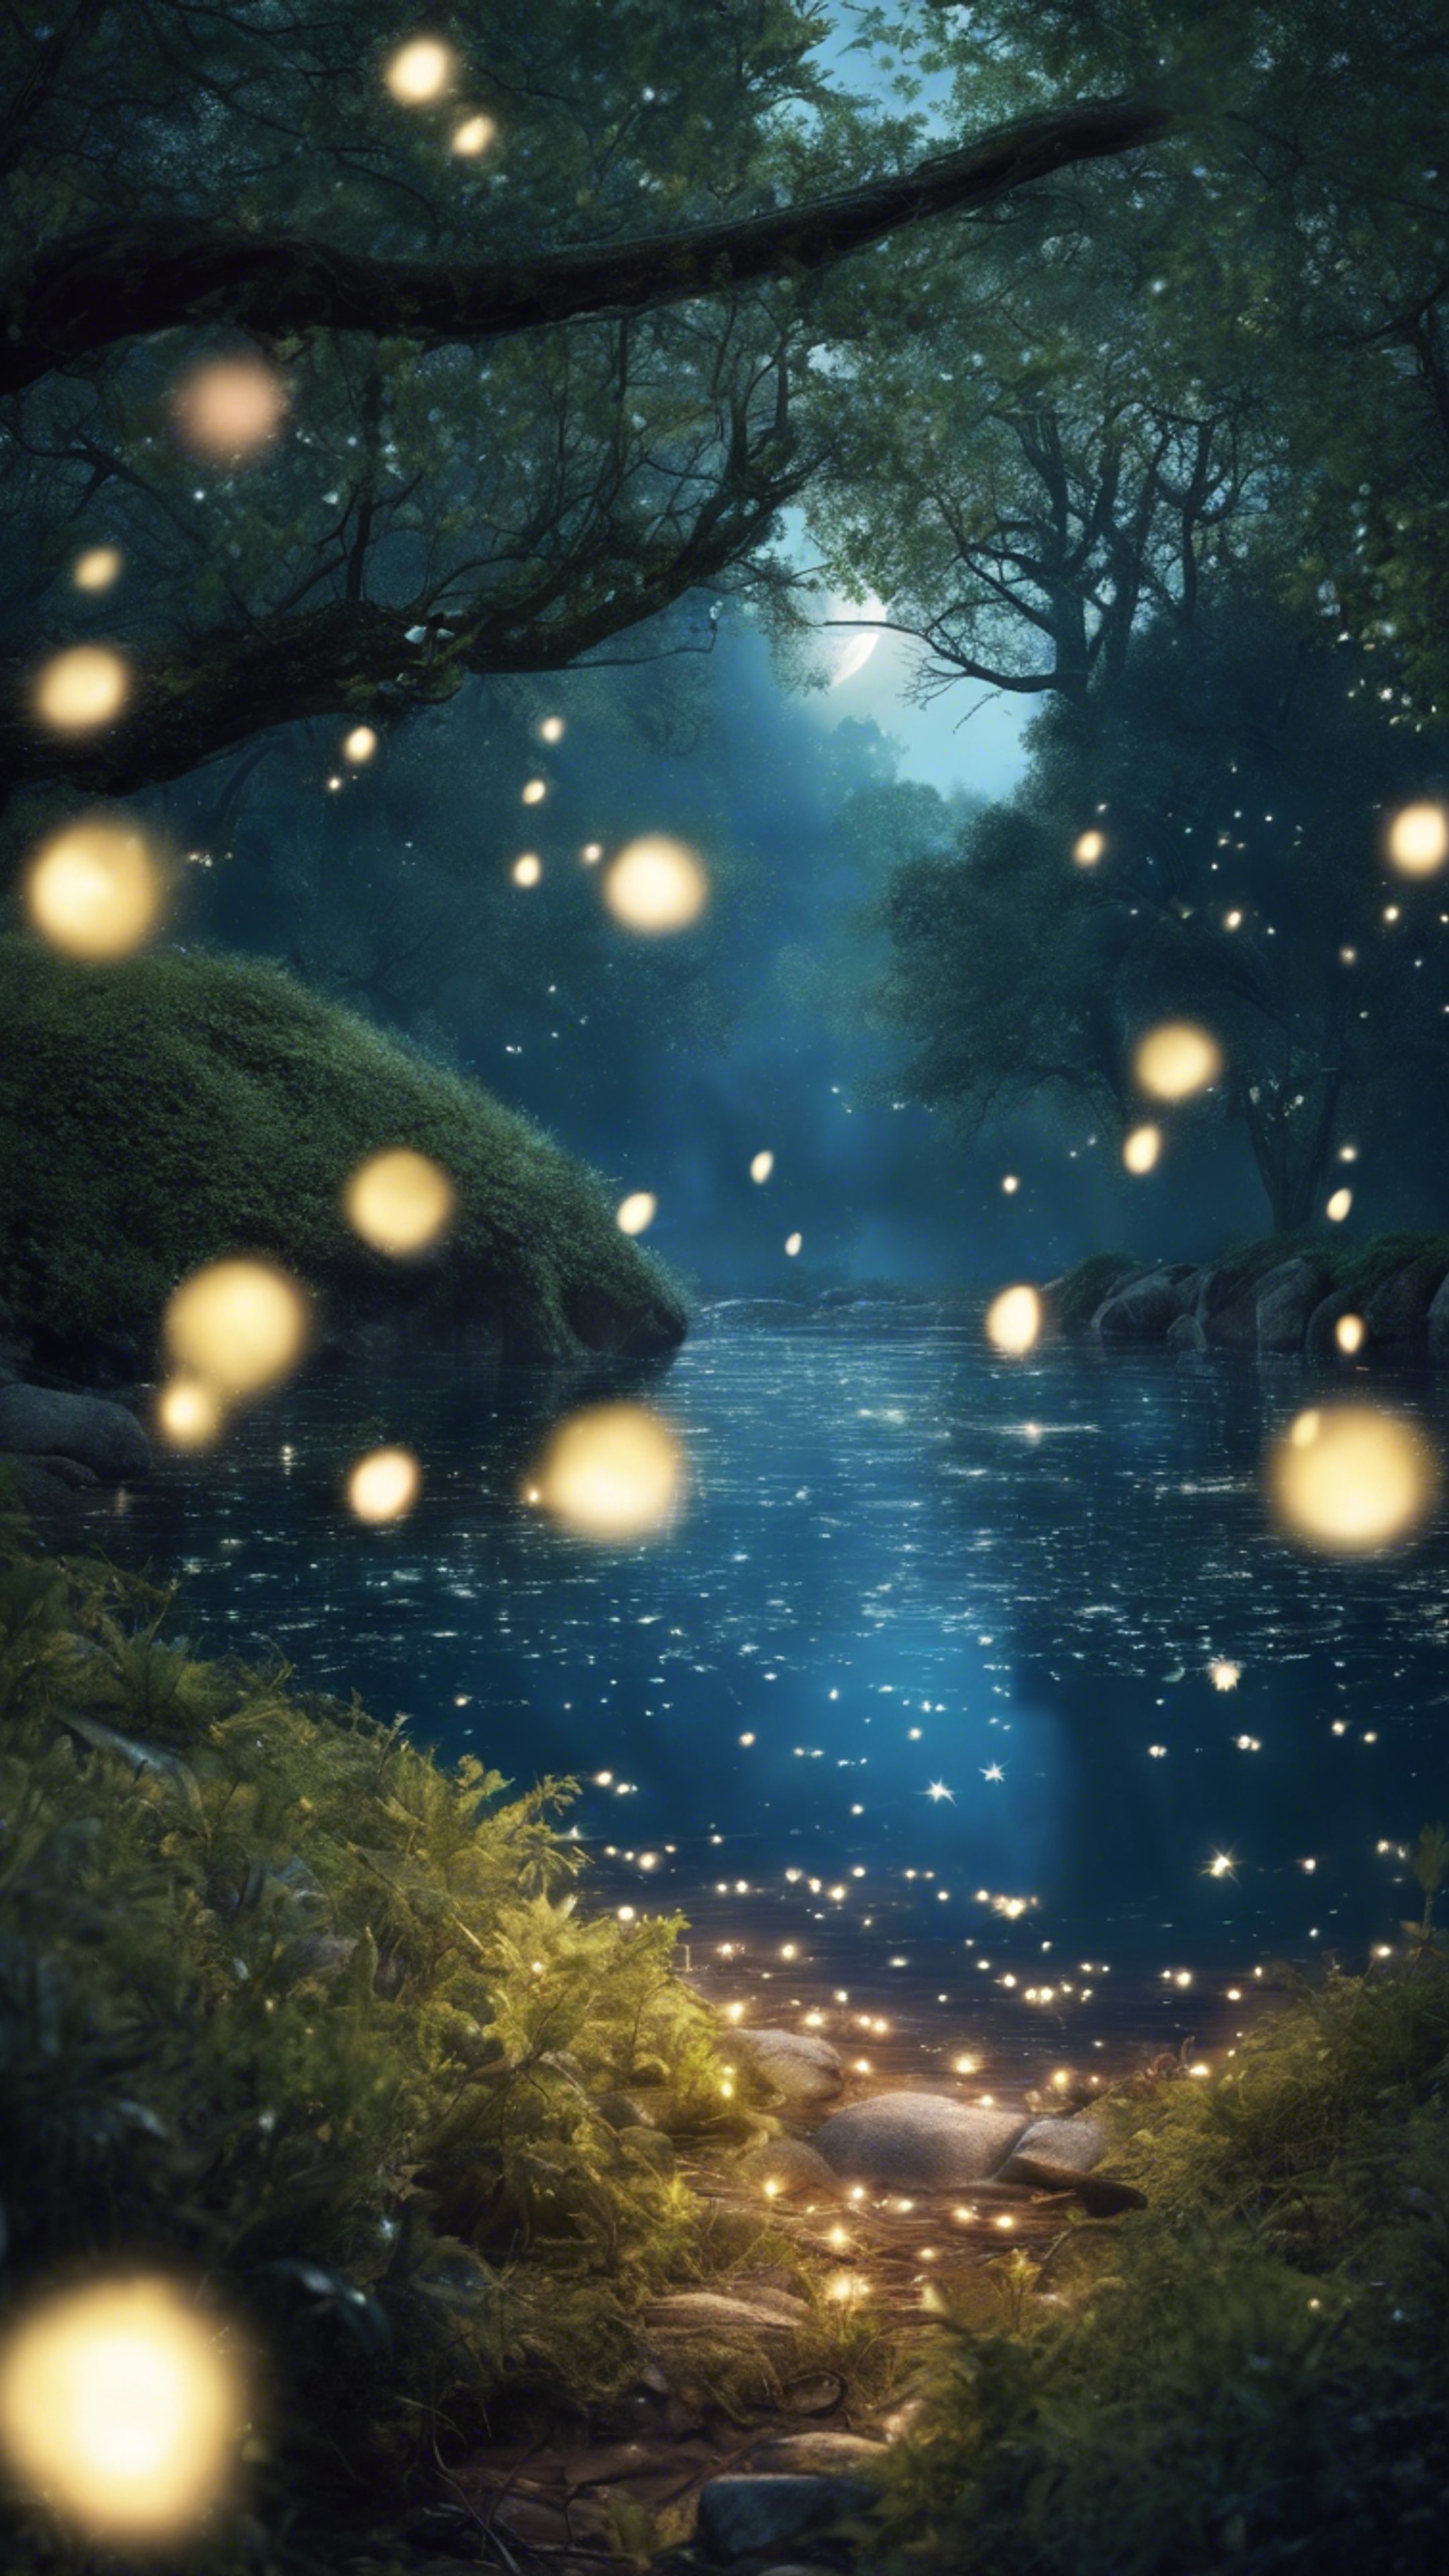 An enchanted forest lit up by midnight blue fireflies, with a river gleaming under the silver moon. Дэлгэцийн зураг[9c93675377644e8e8e21]